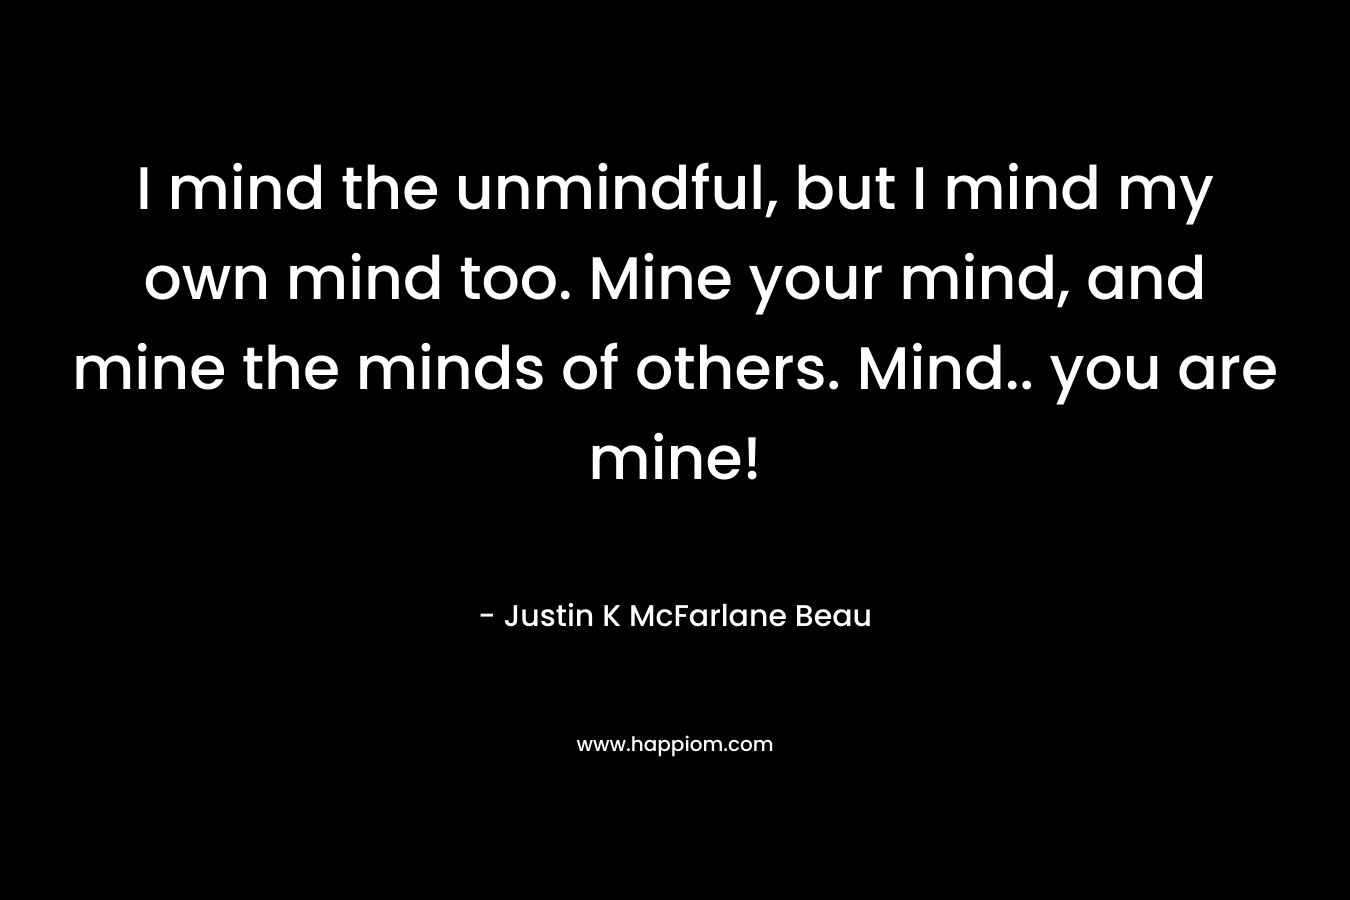 I mind the unmindful, but I mind my own mind too. Mine your mind, and mine the minds of others. Mind.. you are mine!